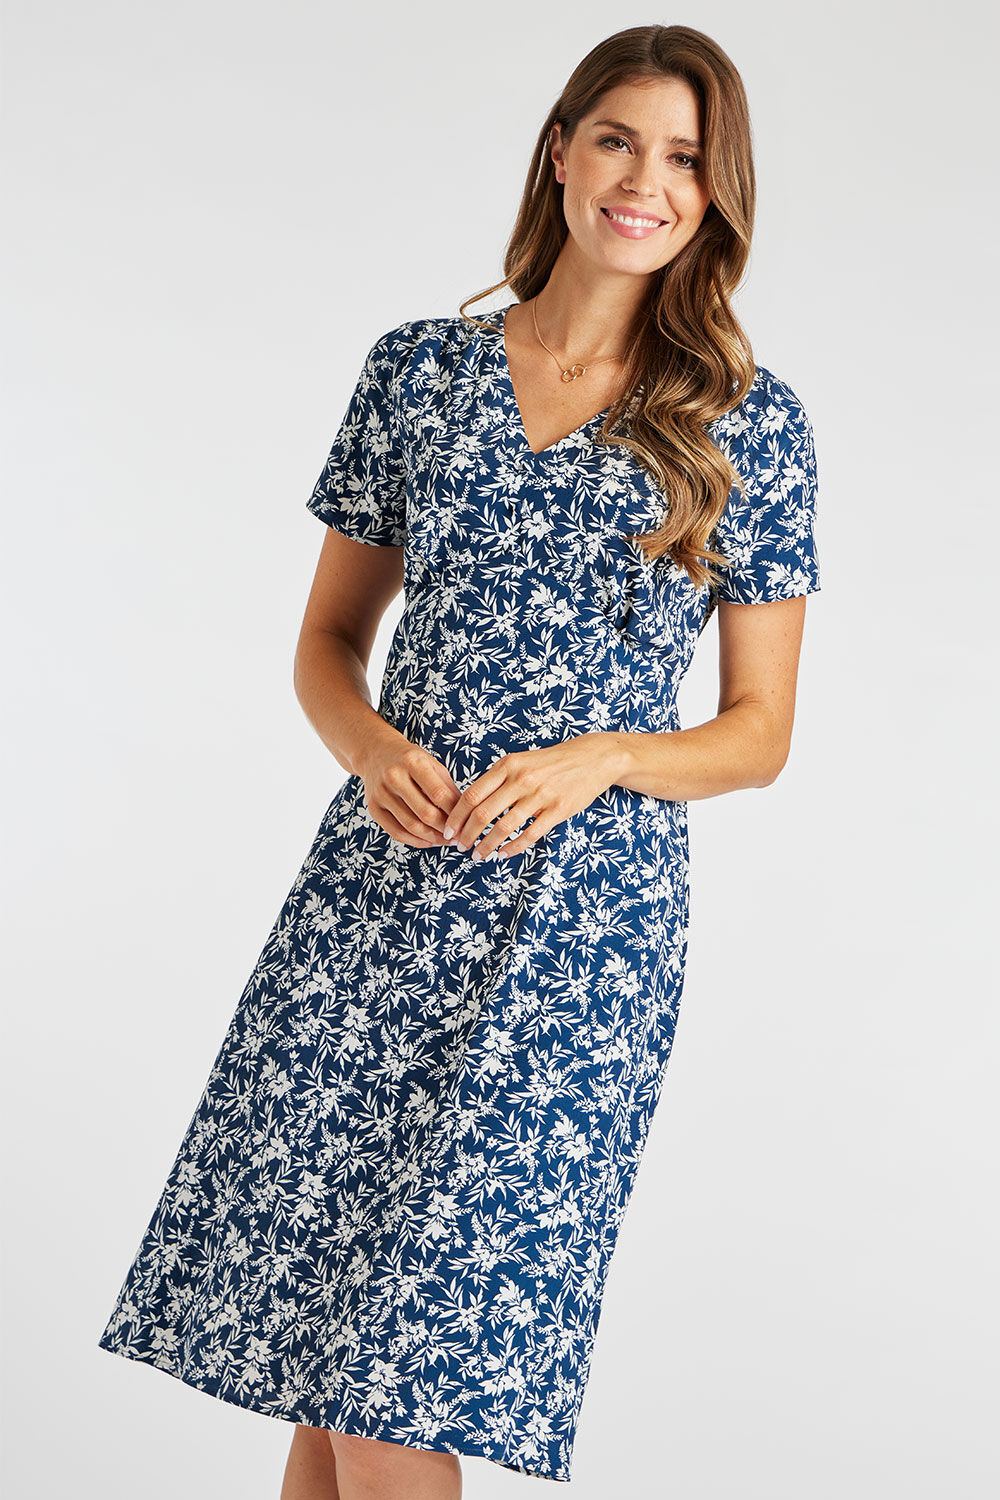 A MAXI DRESS PERFECT FOR EVERY OCCASION -